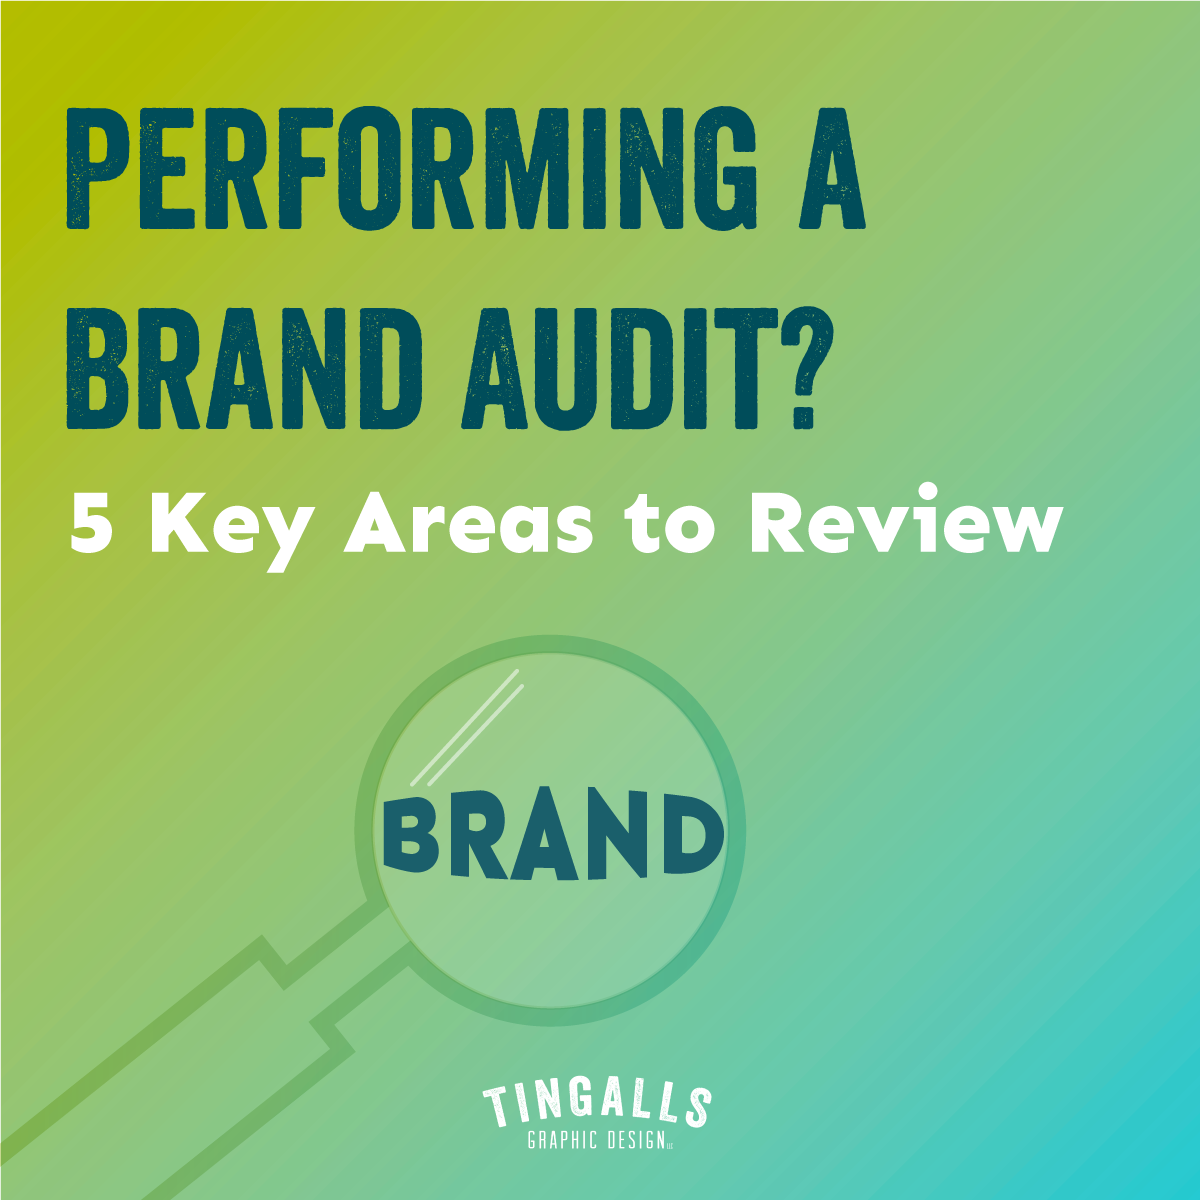 Performing a Brand Audit